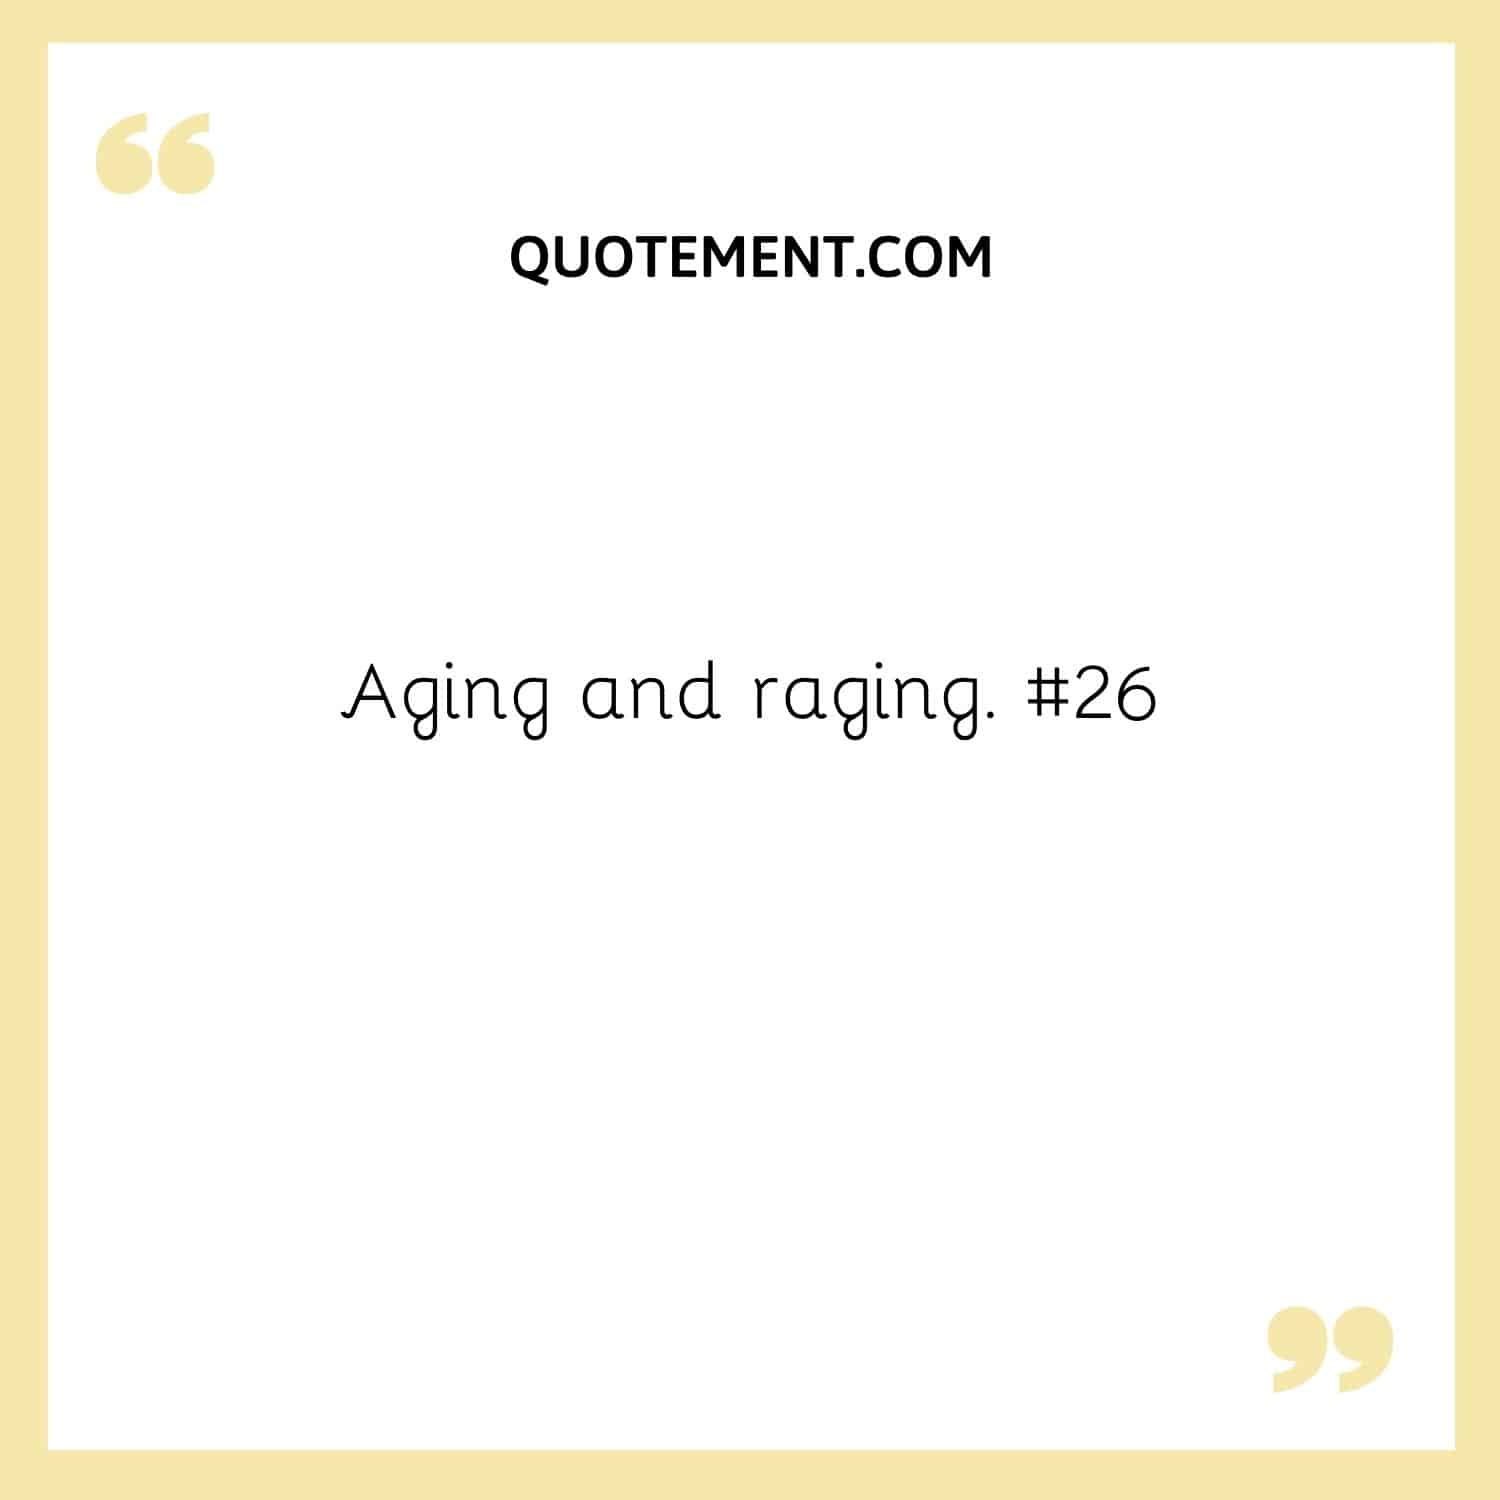 Aging and raging. #26